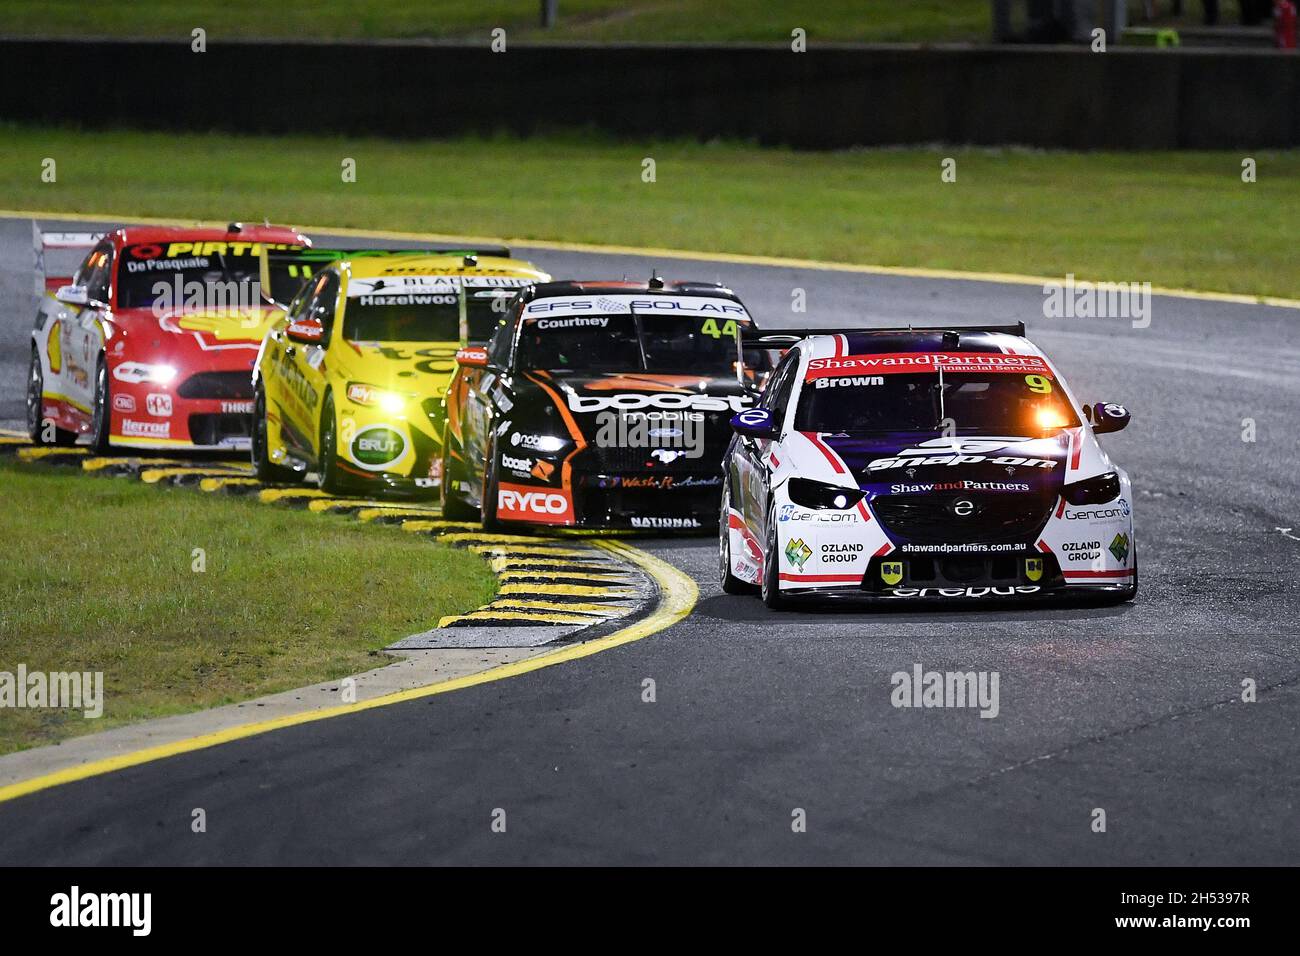 Sydney, Australia, 6 November, 2021. Will Brown in the Erebus Motorsport Holden Commodore in front of James Courtney in the Boost Mobile Racing Ford Mustang during the V8 Supercars Sydney SuperNight at Sydney Motorsport Park, on November 06, 2021 in Sydney, Australia. Credit: Steven Markham/Speed Media/Alamy Live News Stock Photo